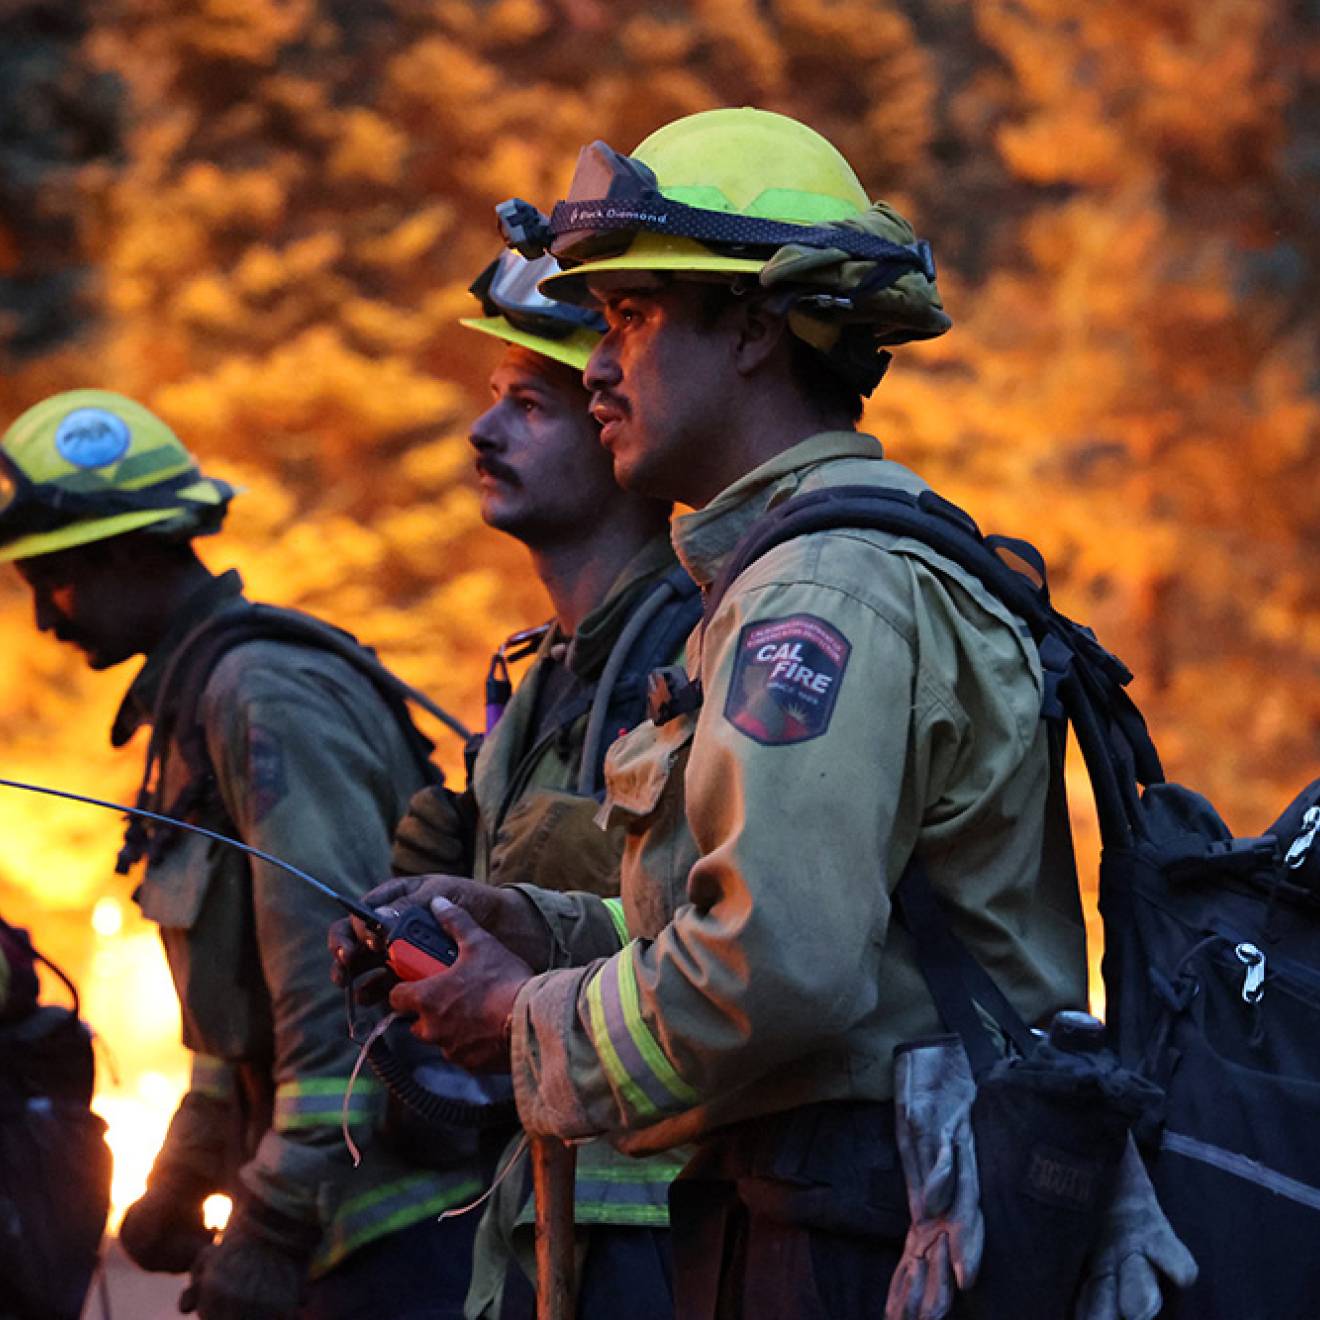 Four firefighters stand against a backdrop of flames. The scene is dark, and 2 young male firefighters hold a device with a long antenna